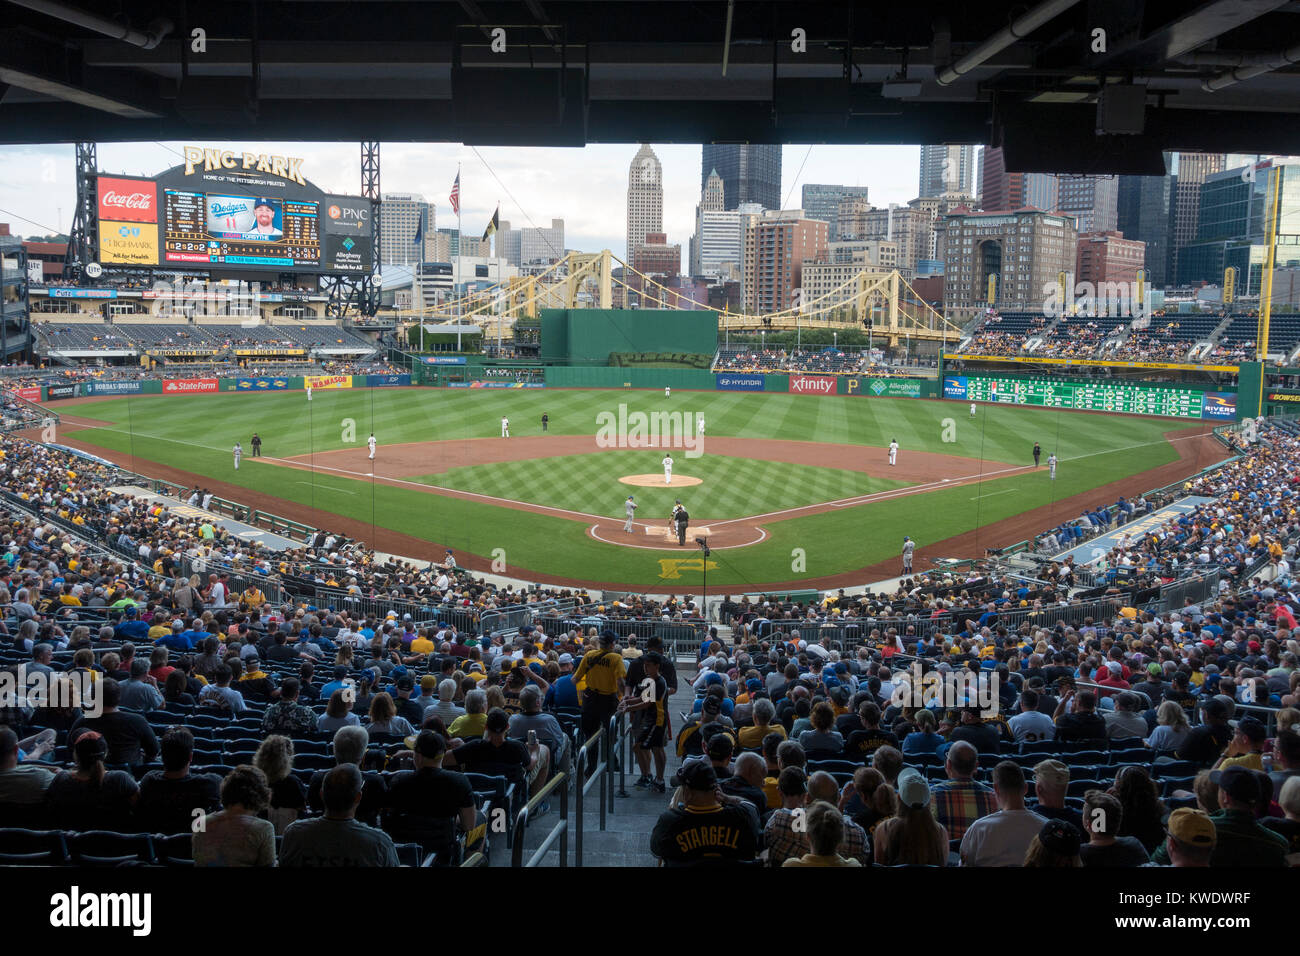 PNC Park, the home field for the Pittsburgh Pirates Major League